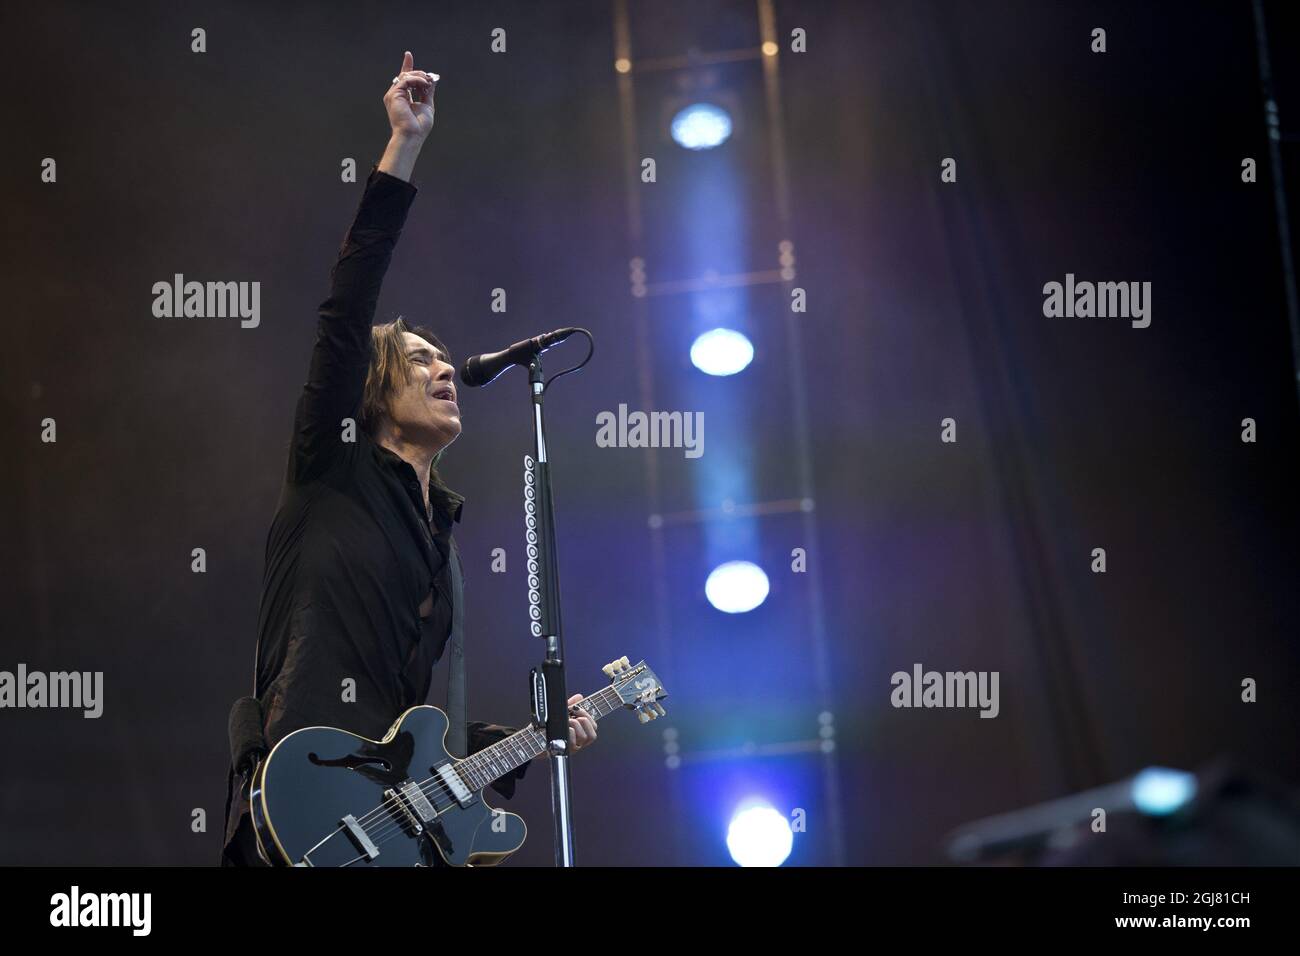 GOTEBORG 2013-07-12 Swedish singer Per Gessle (of pop duo Roxette) performs  with his band Gyllene Tider at Ullevi stadium in Gothenburg on July 12,  2013. Photo: Bjorn Larsson Rosvall / SCANPIX / code 9200 Stock Photo - Alamy